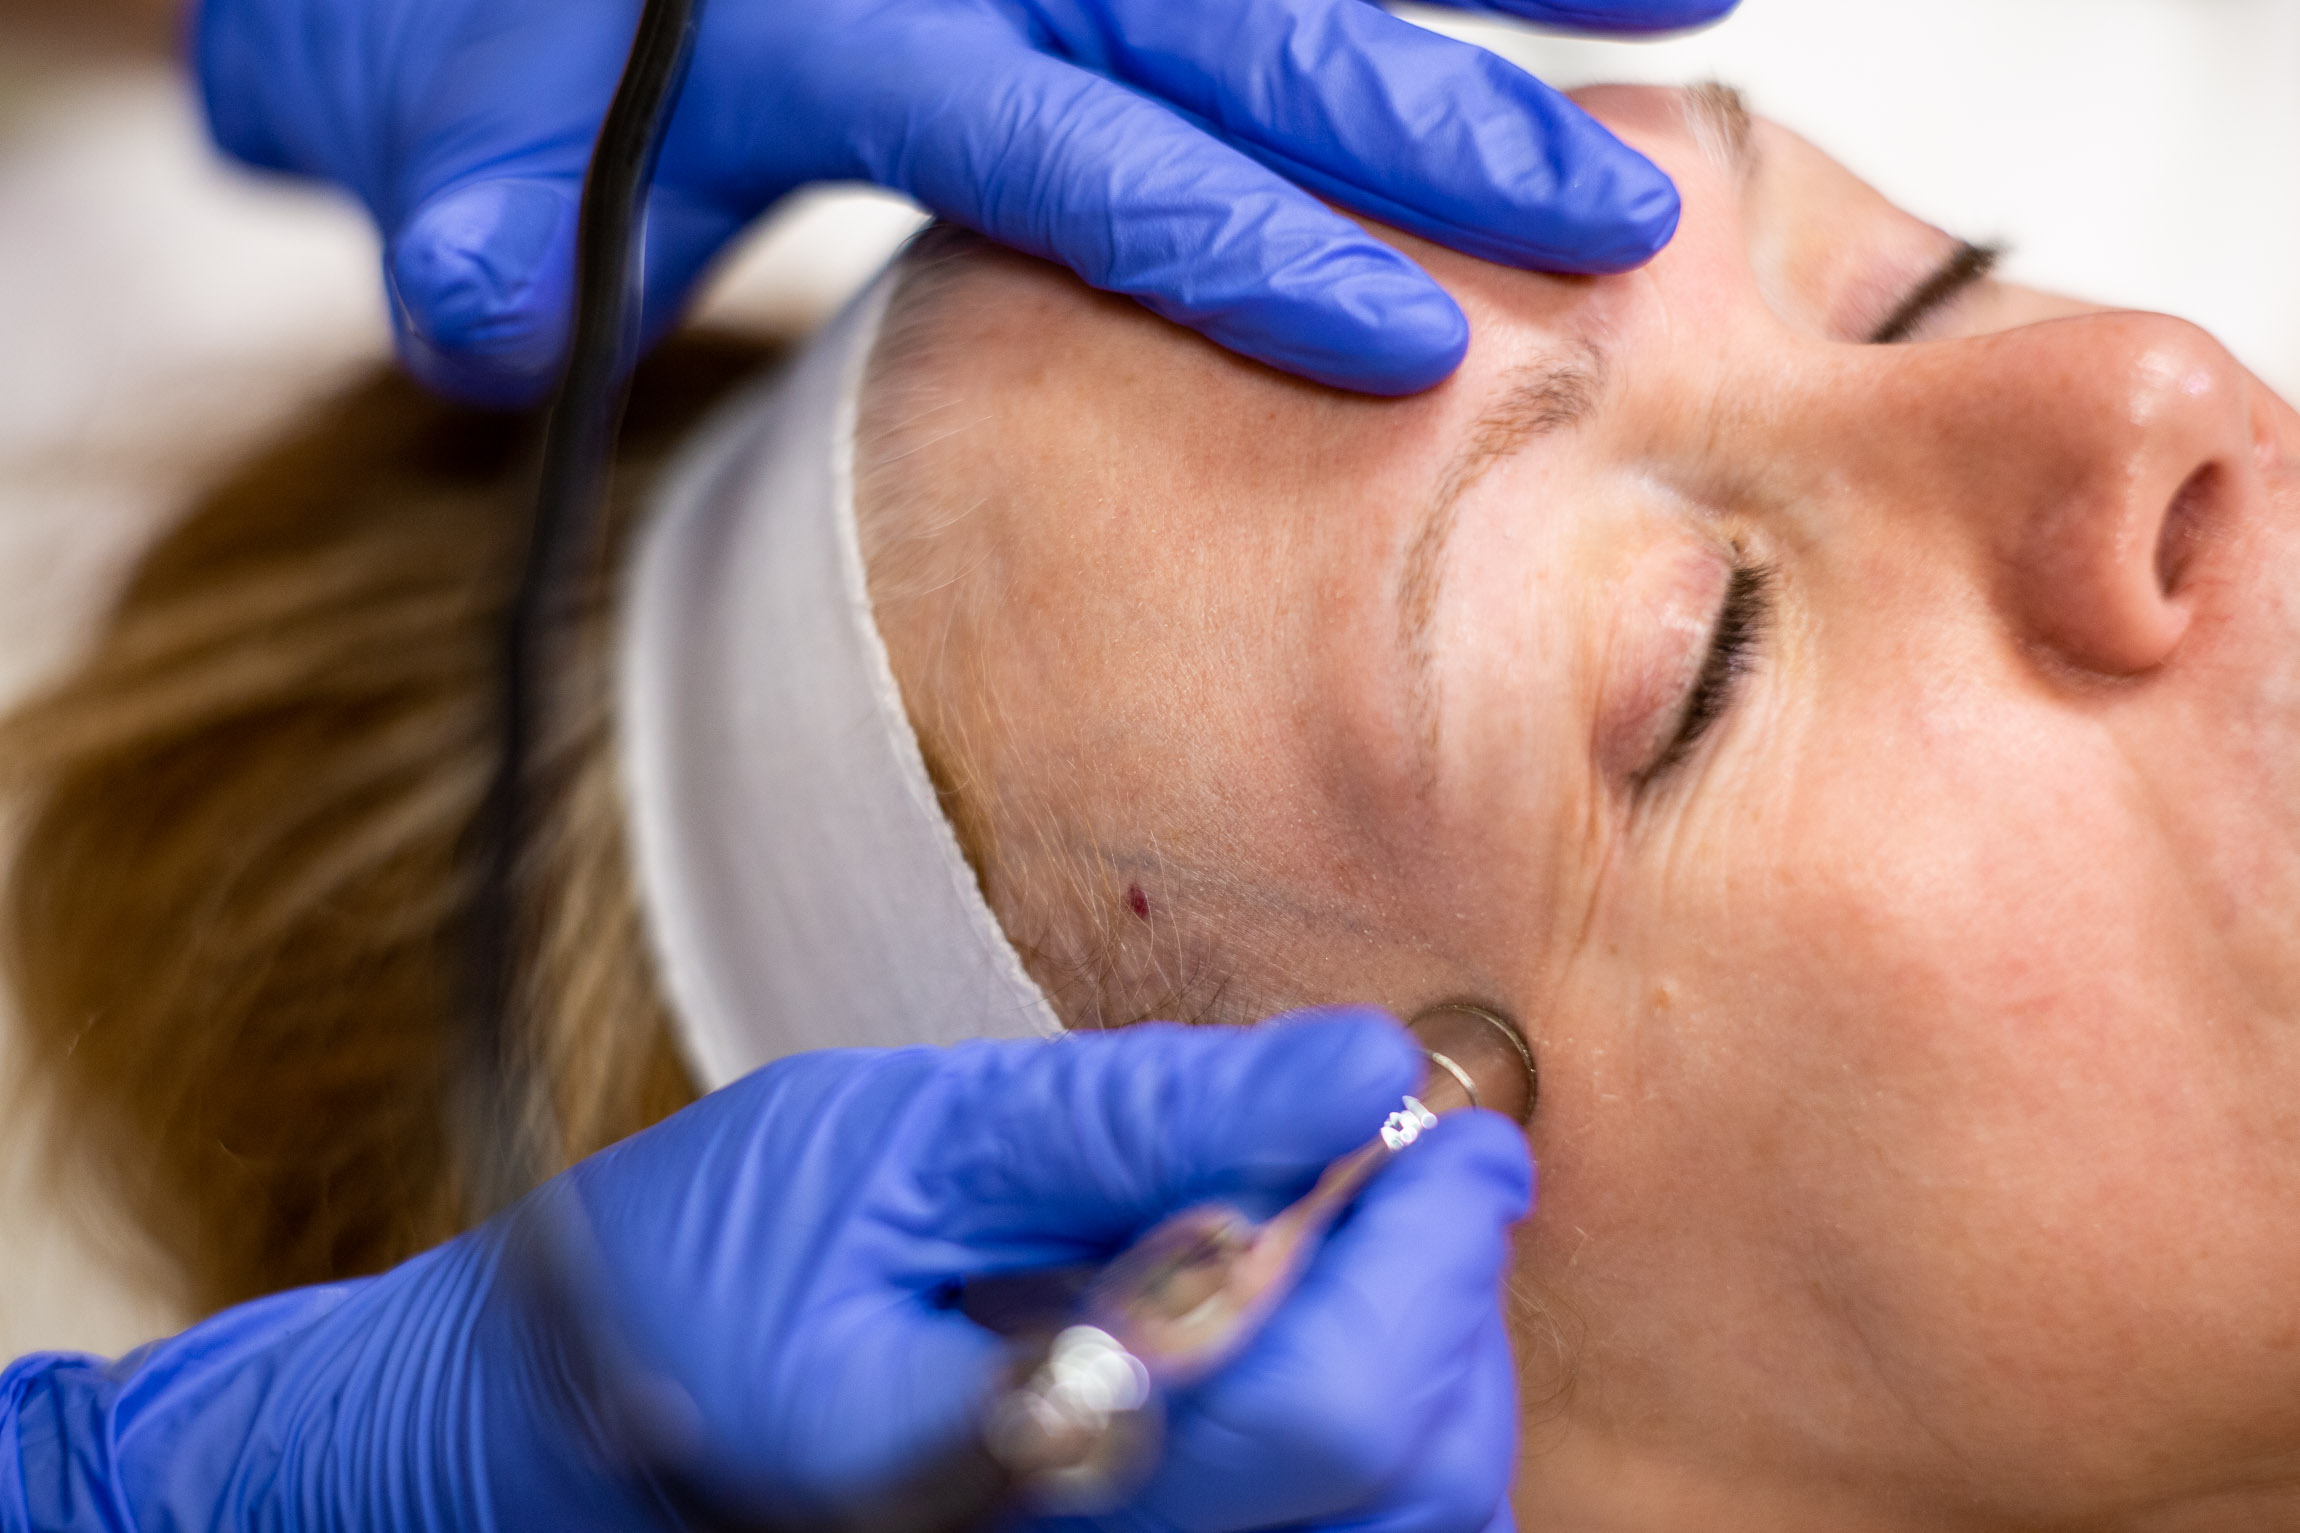 female patient receiving treatment for microdermabrasion in Rochester, NY